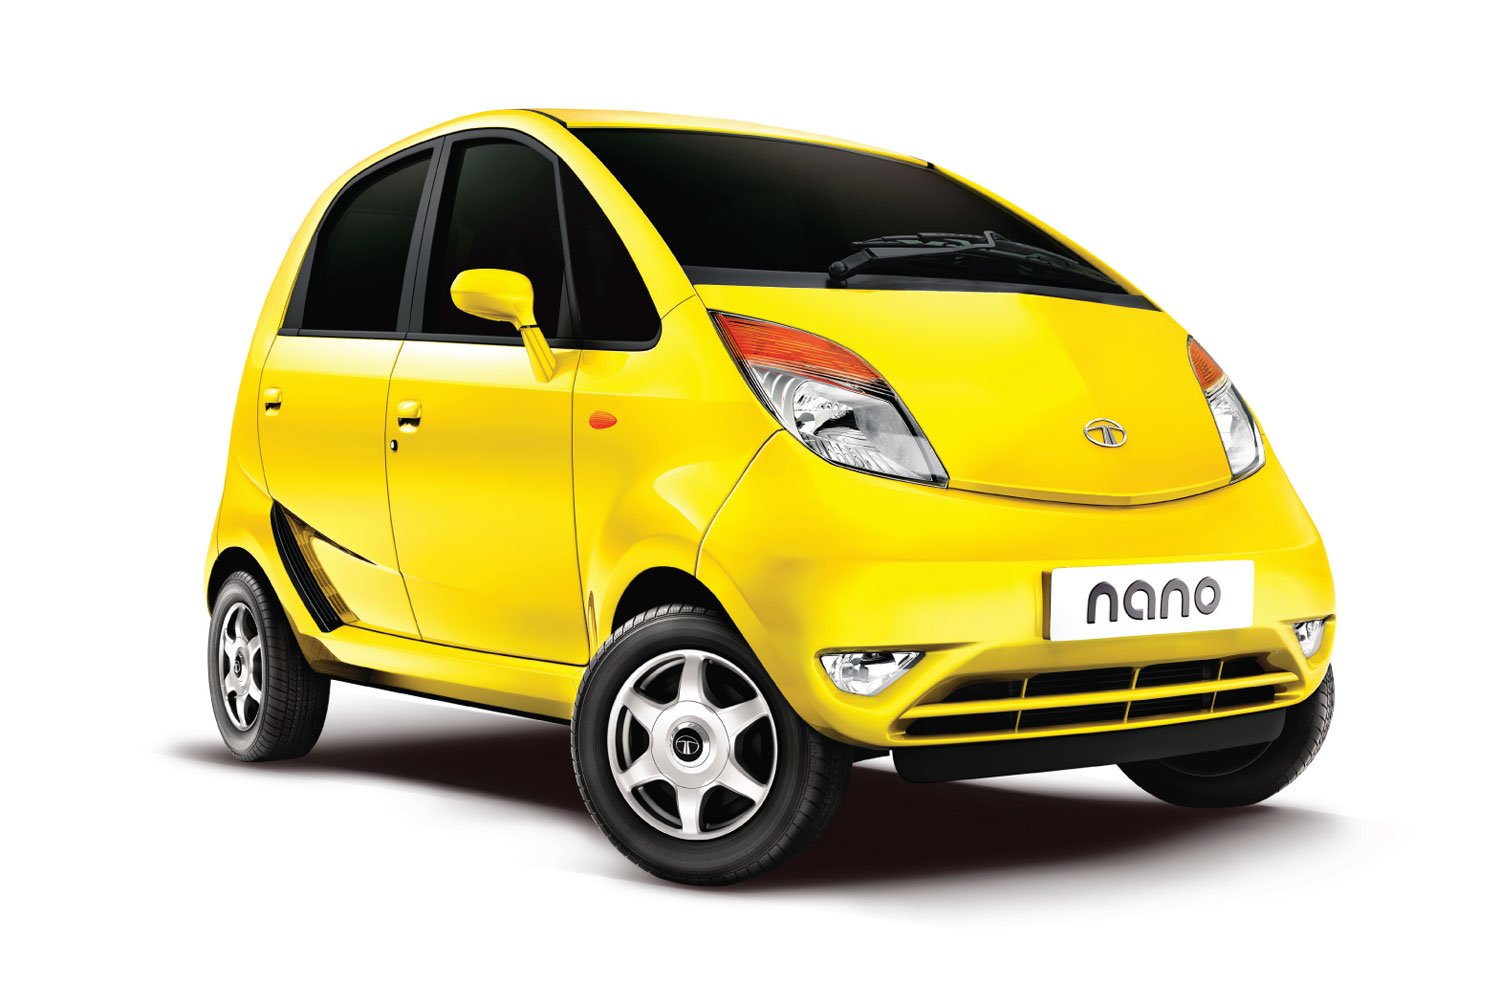 Tata Motor's Nano is small car with 600 CC engine, and is billed as the most affordable car in the world